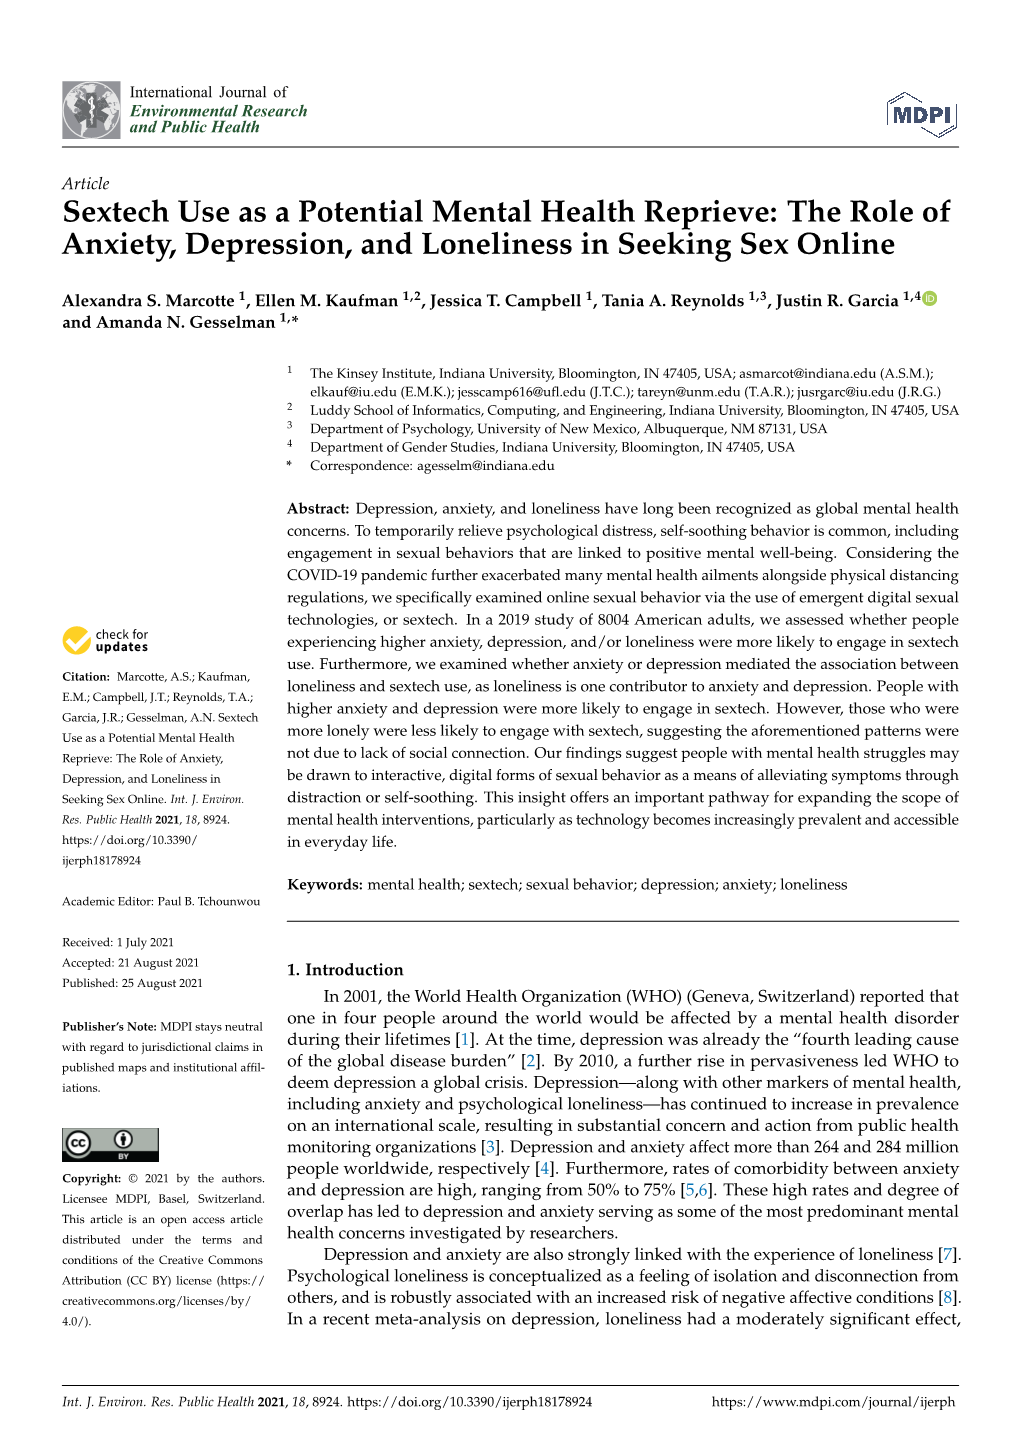 Sextech Use As a Potential Mental Health Reprieve: the Role of Anxiety, Depression, and Loneliness in Seeking Sex Online